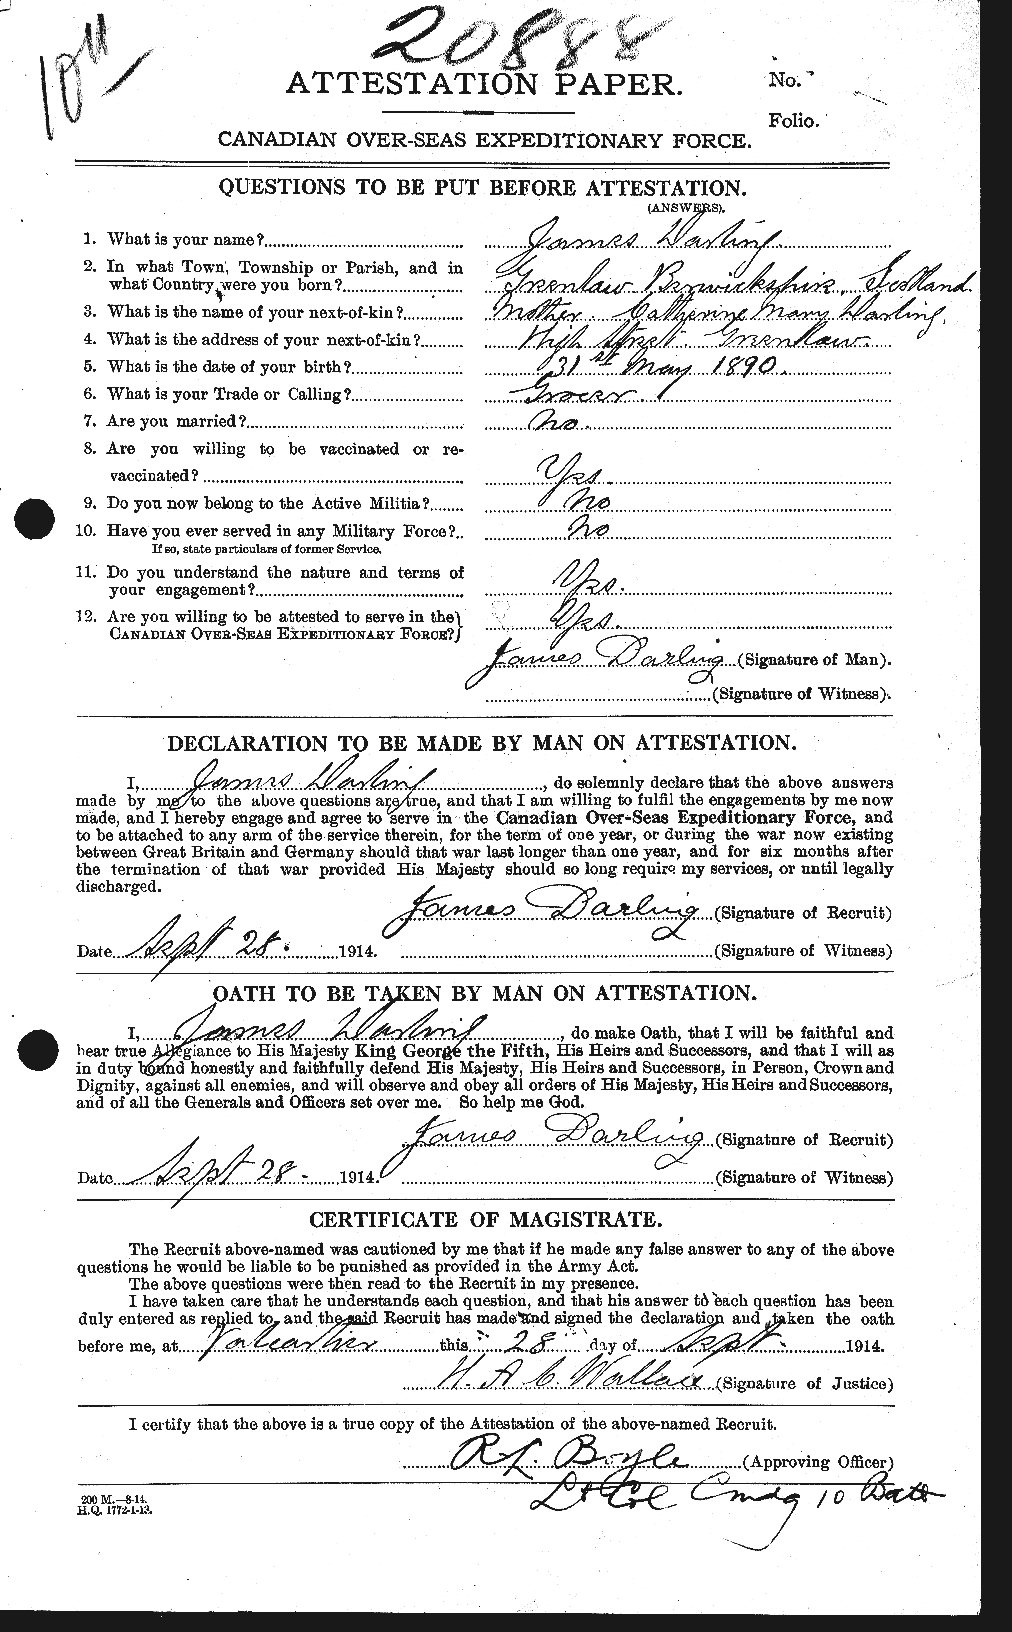 Personnel Records of the First World War - CEF 280199a